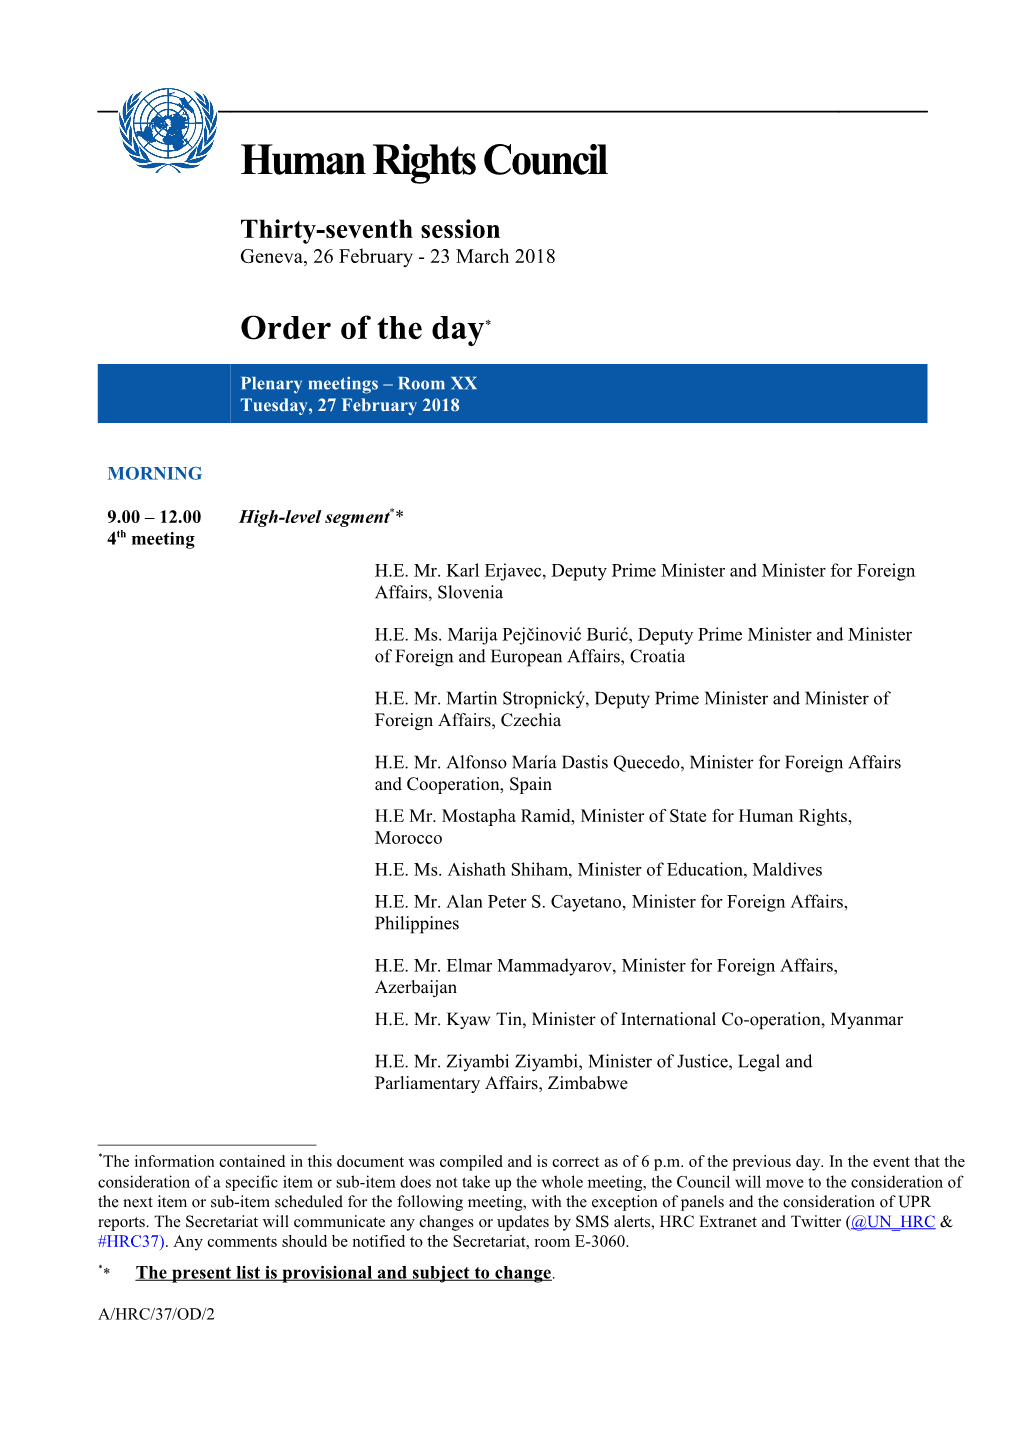 Tuesday, 27 February 2018, Order of the Day in English